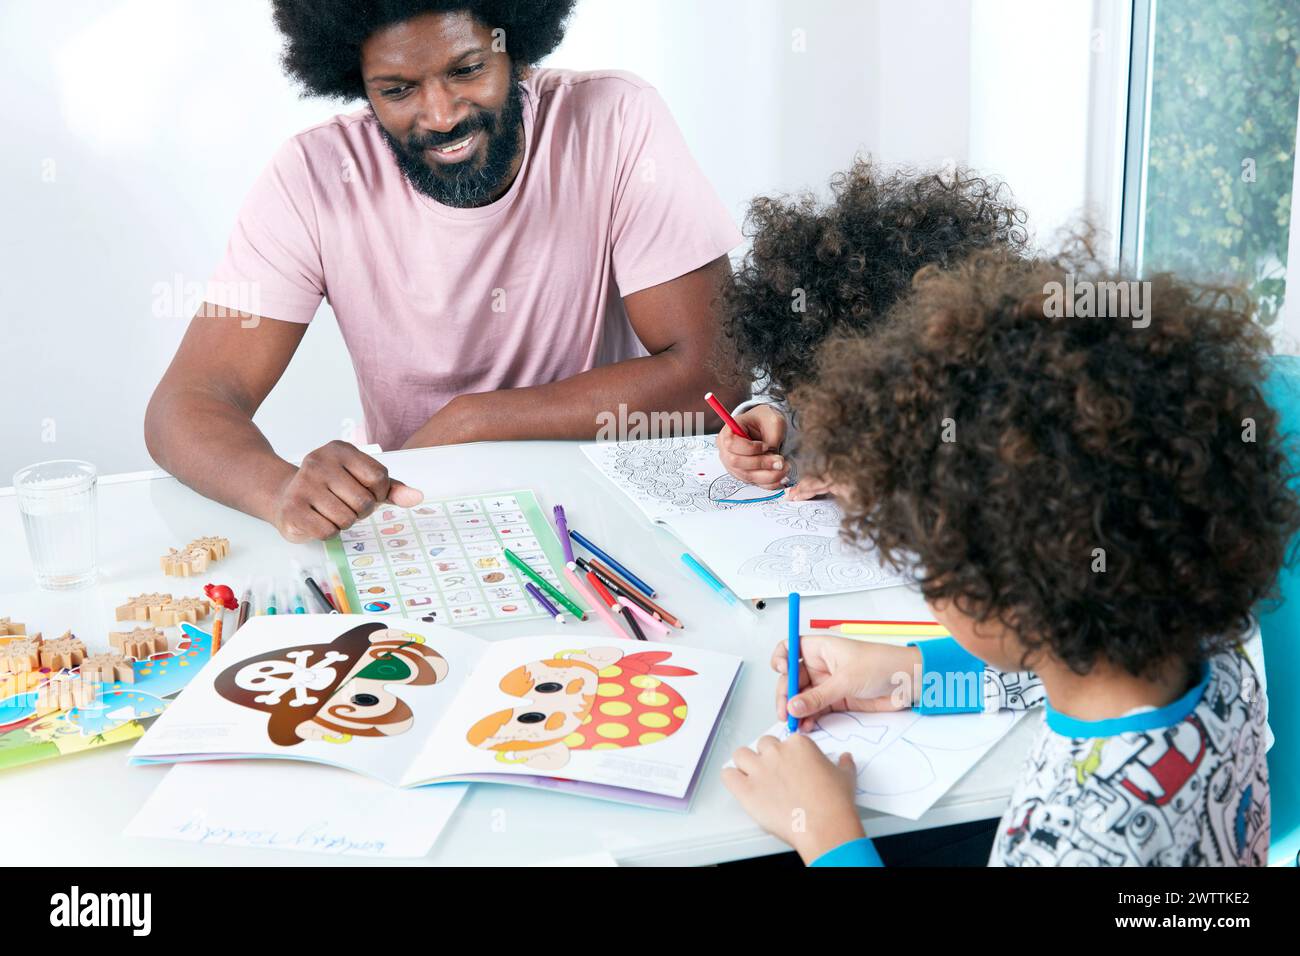 Adult and children engaged in coloring activities Stock Photo